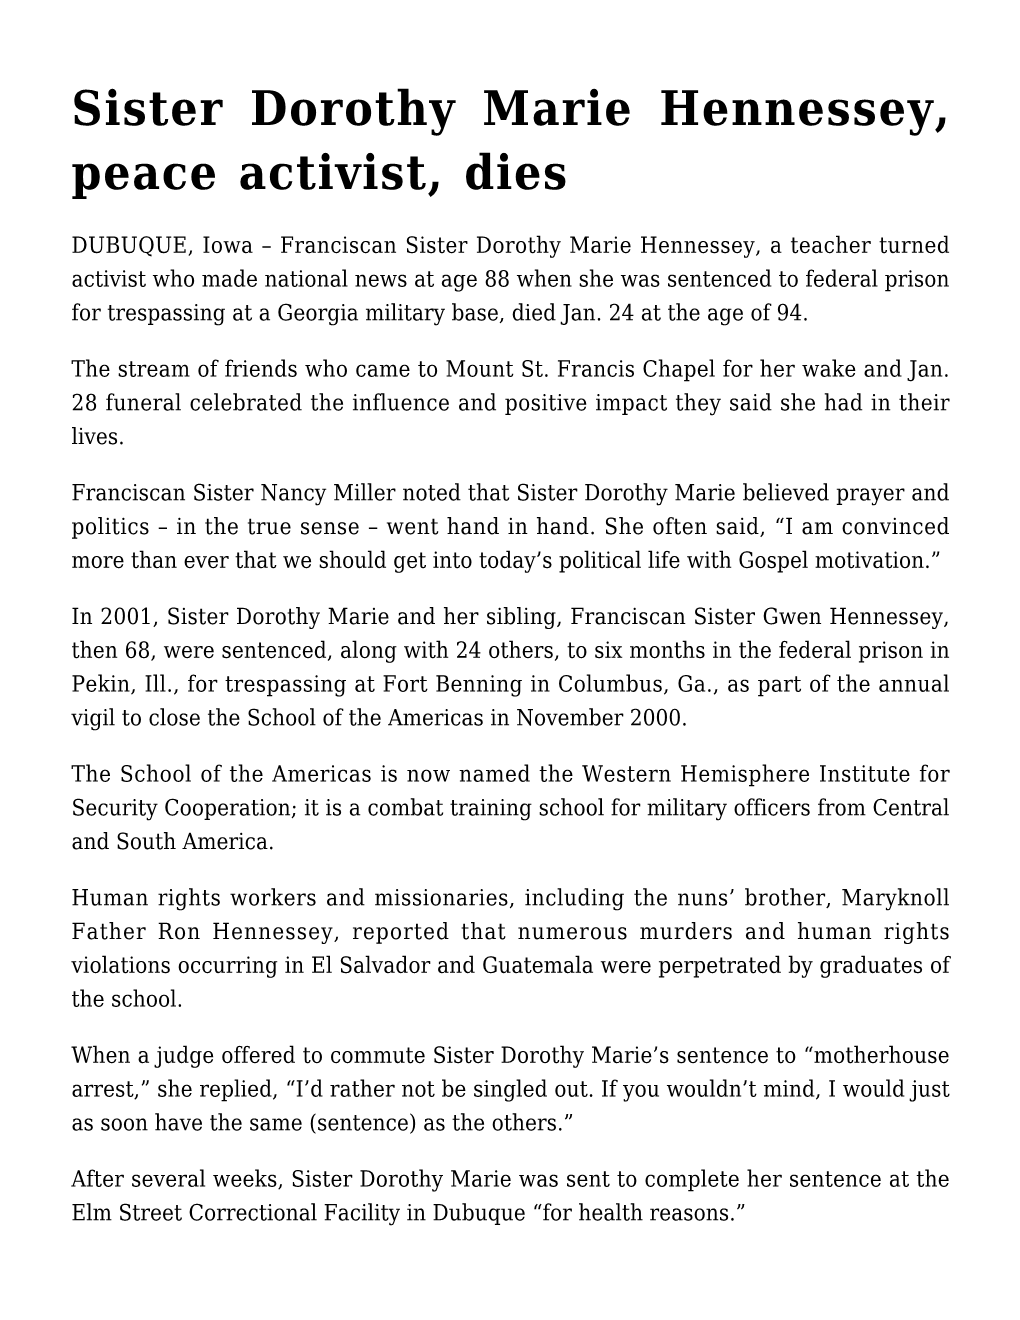 Sister Dorothy Marie Hennessey, Peace Activist, Dies